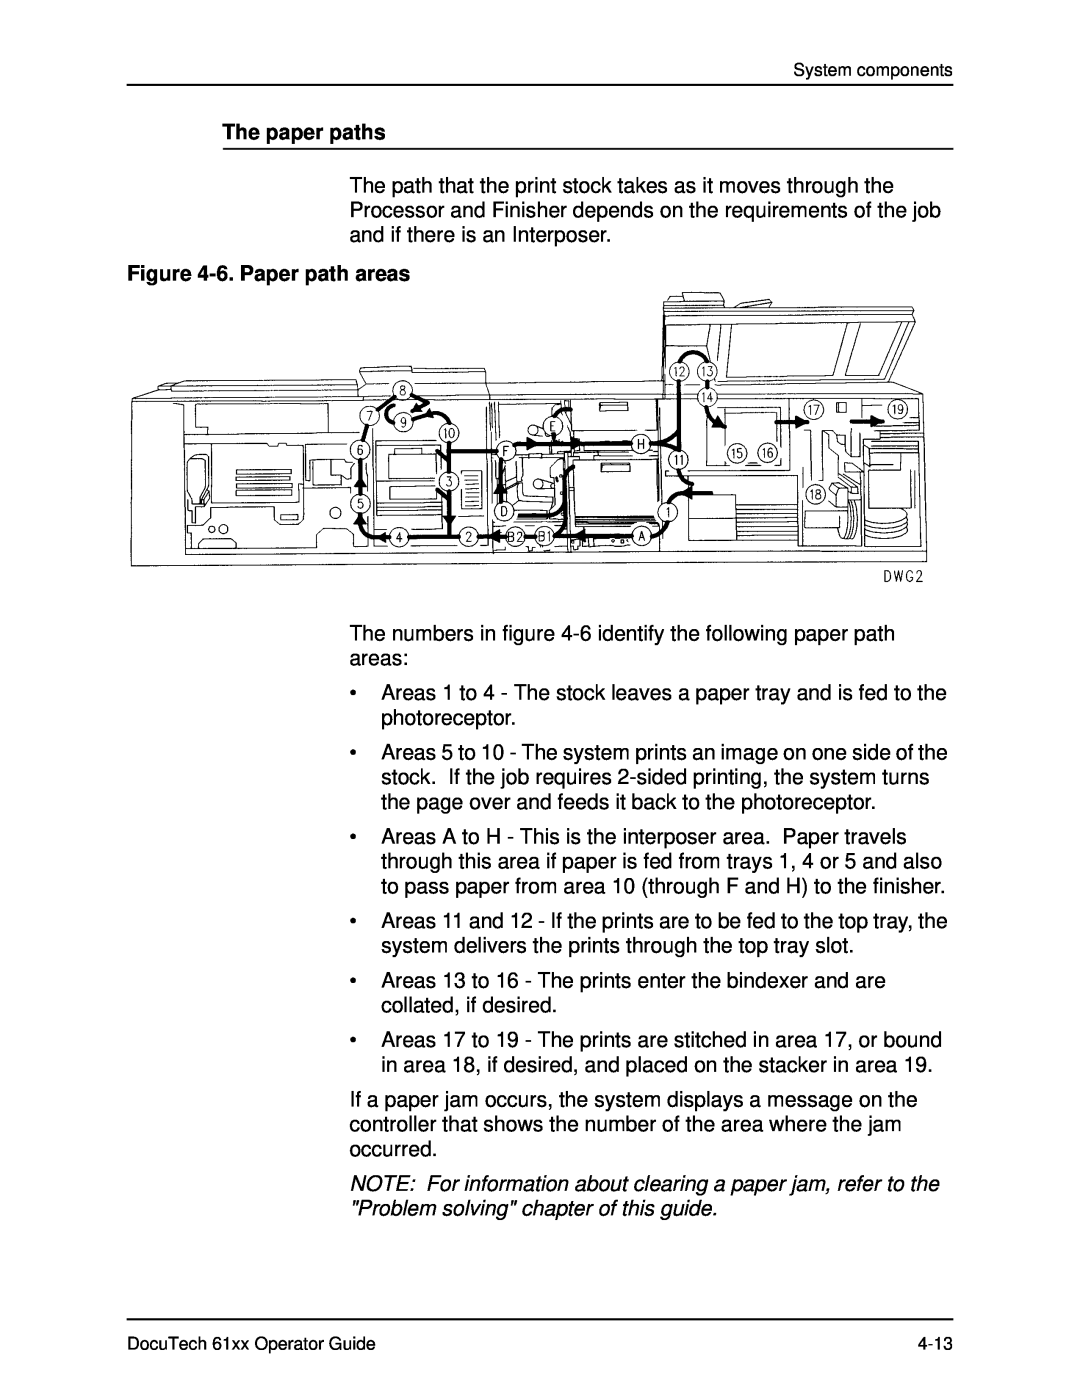 Xerox 61xx manual The paper paths, 6. Paper path areas 